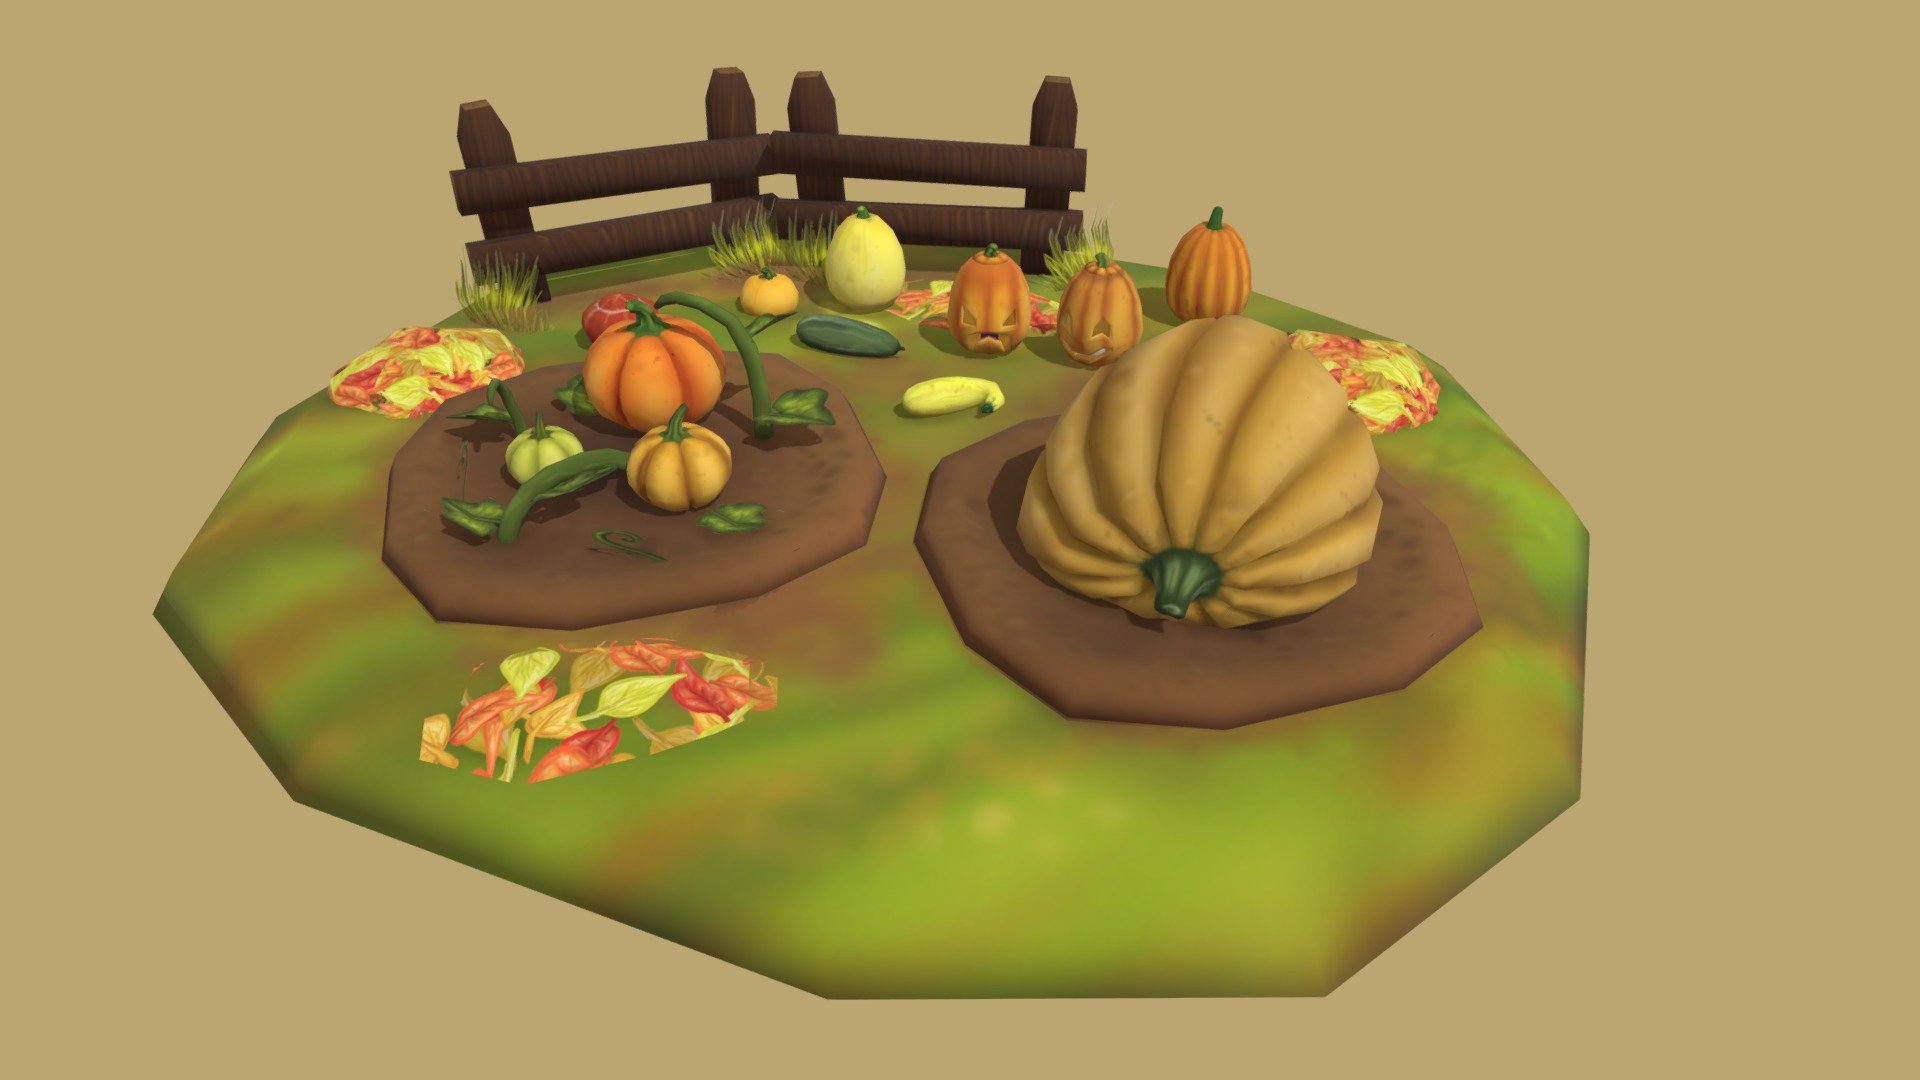 What would farm life be without a good pumpkin harvest? Not much, everyone knows that.
So here's a pumpkin bed for all those who love farm life, like me 3d model